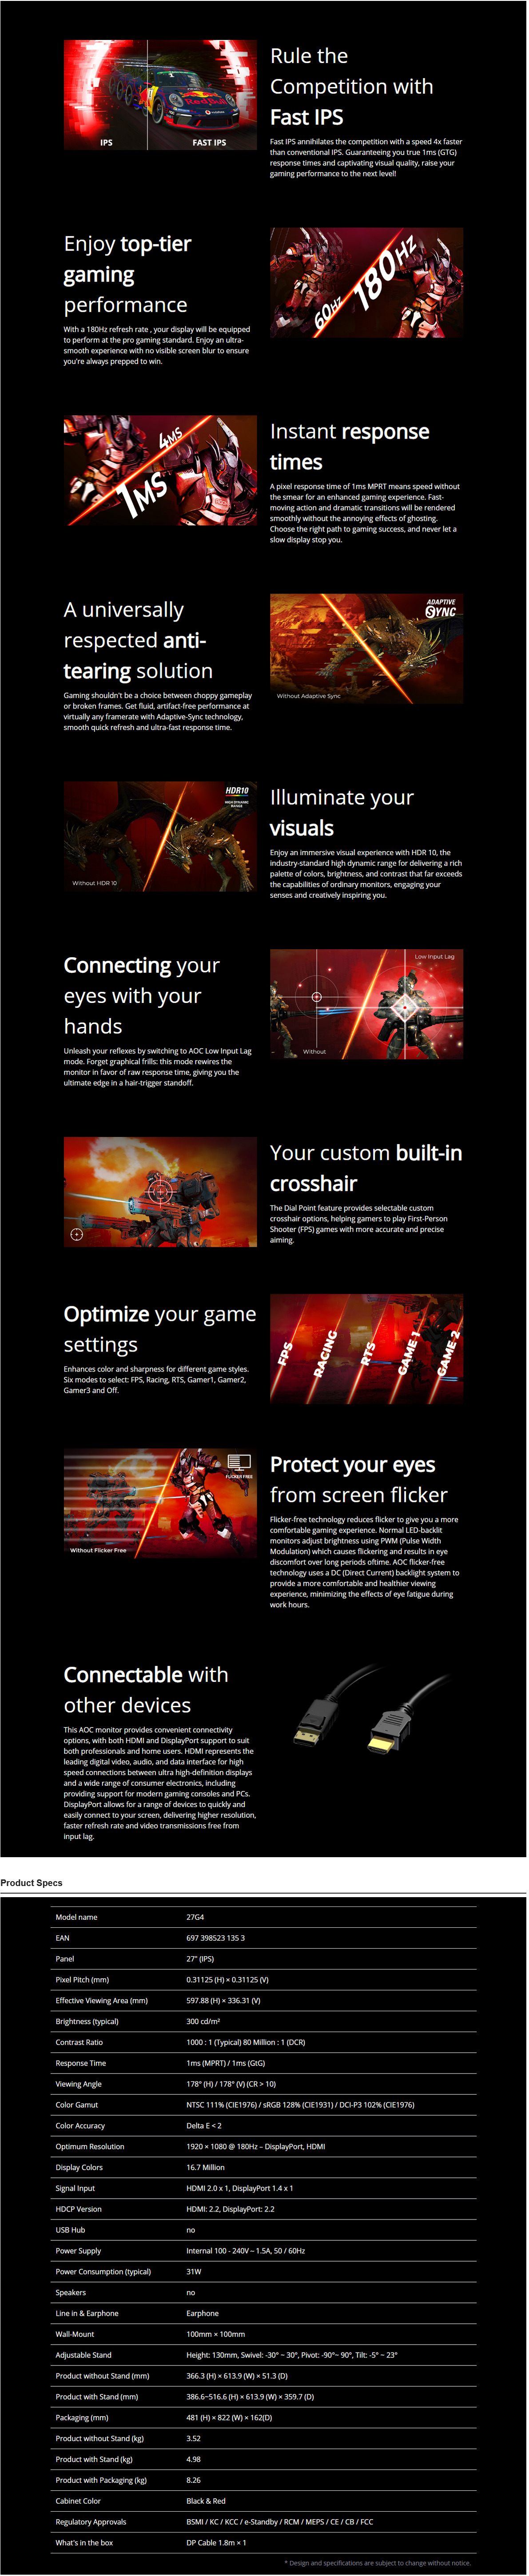 A large marketing image providing additional information about the product AOC Gaming 27G4 27" FHD 180Hz IPS Monitor - Additional alt info not provided